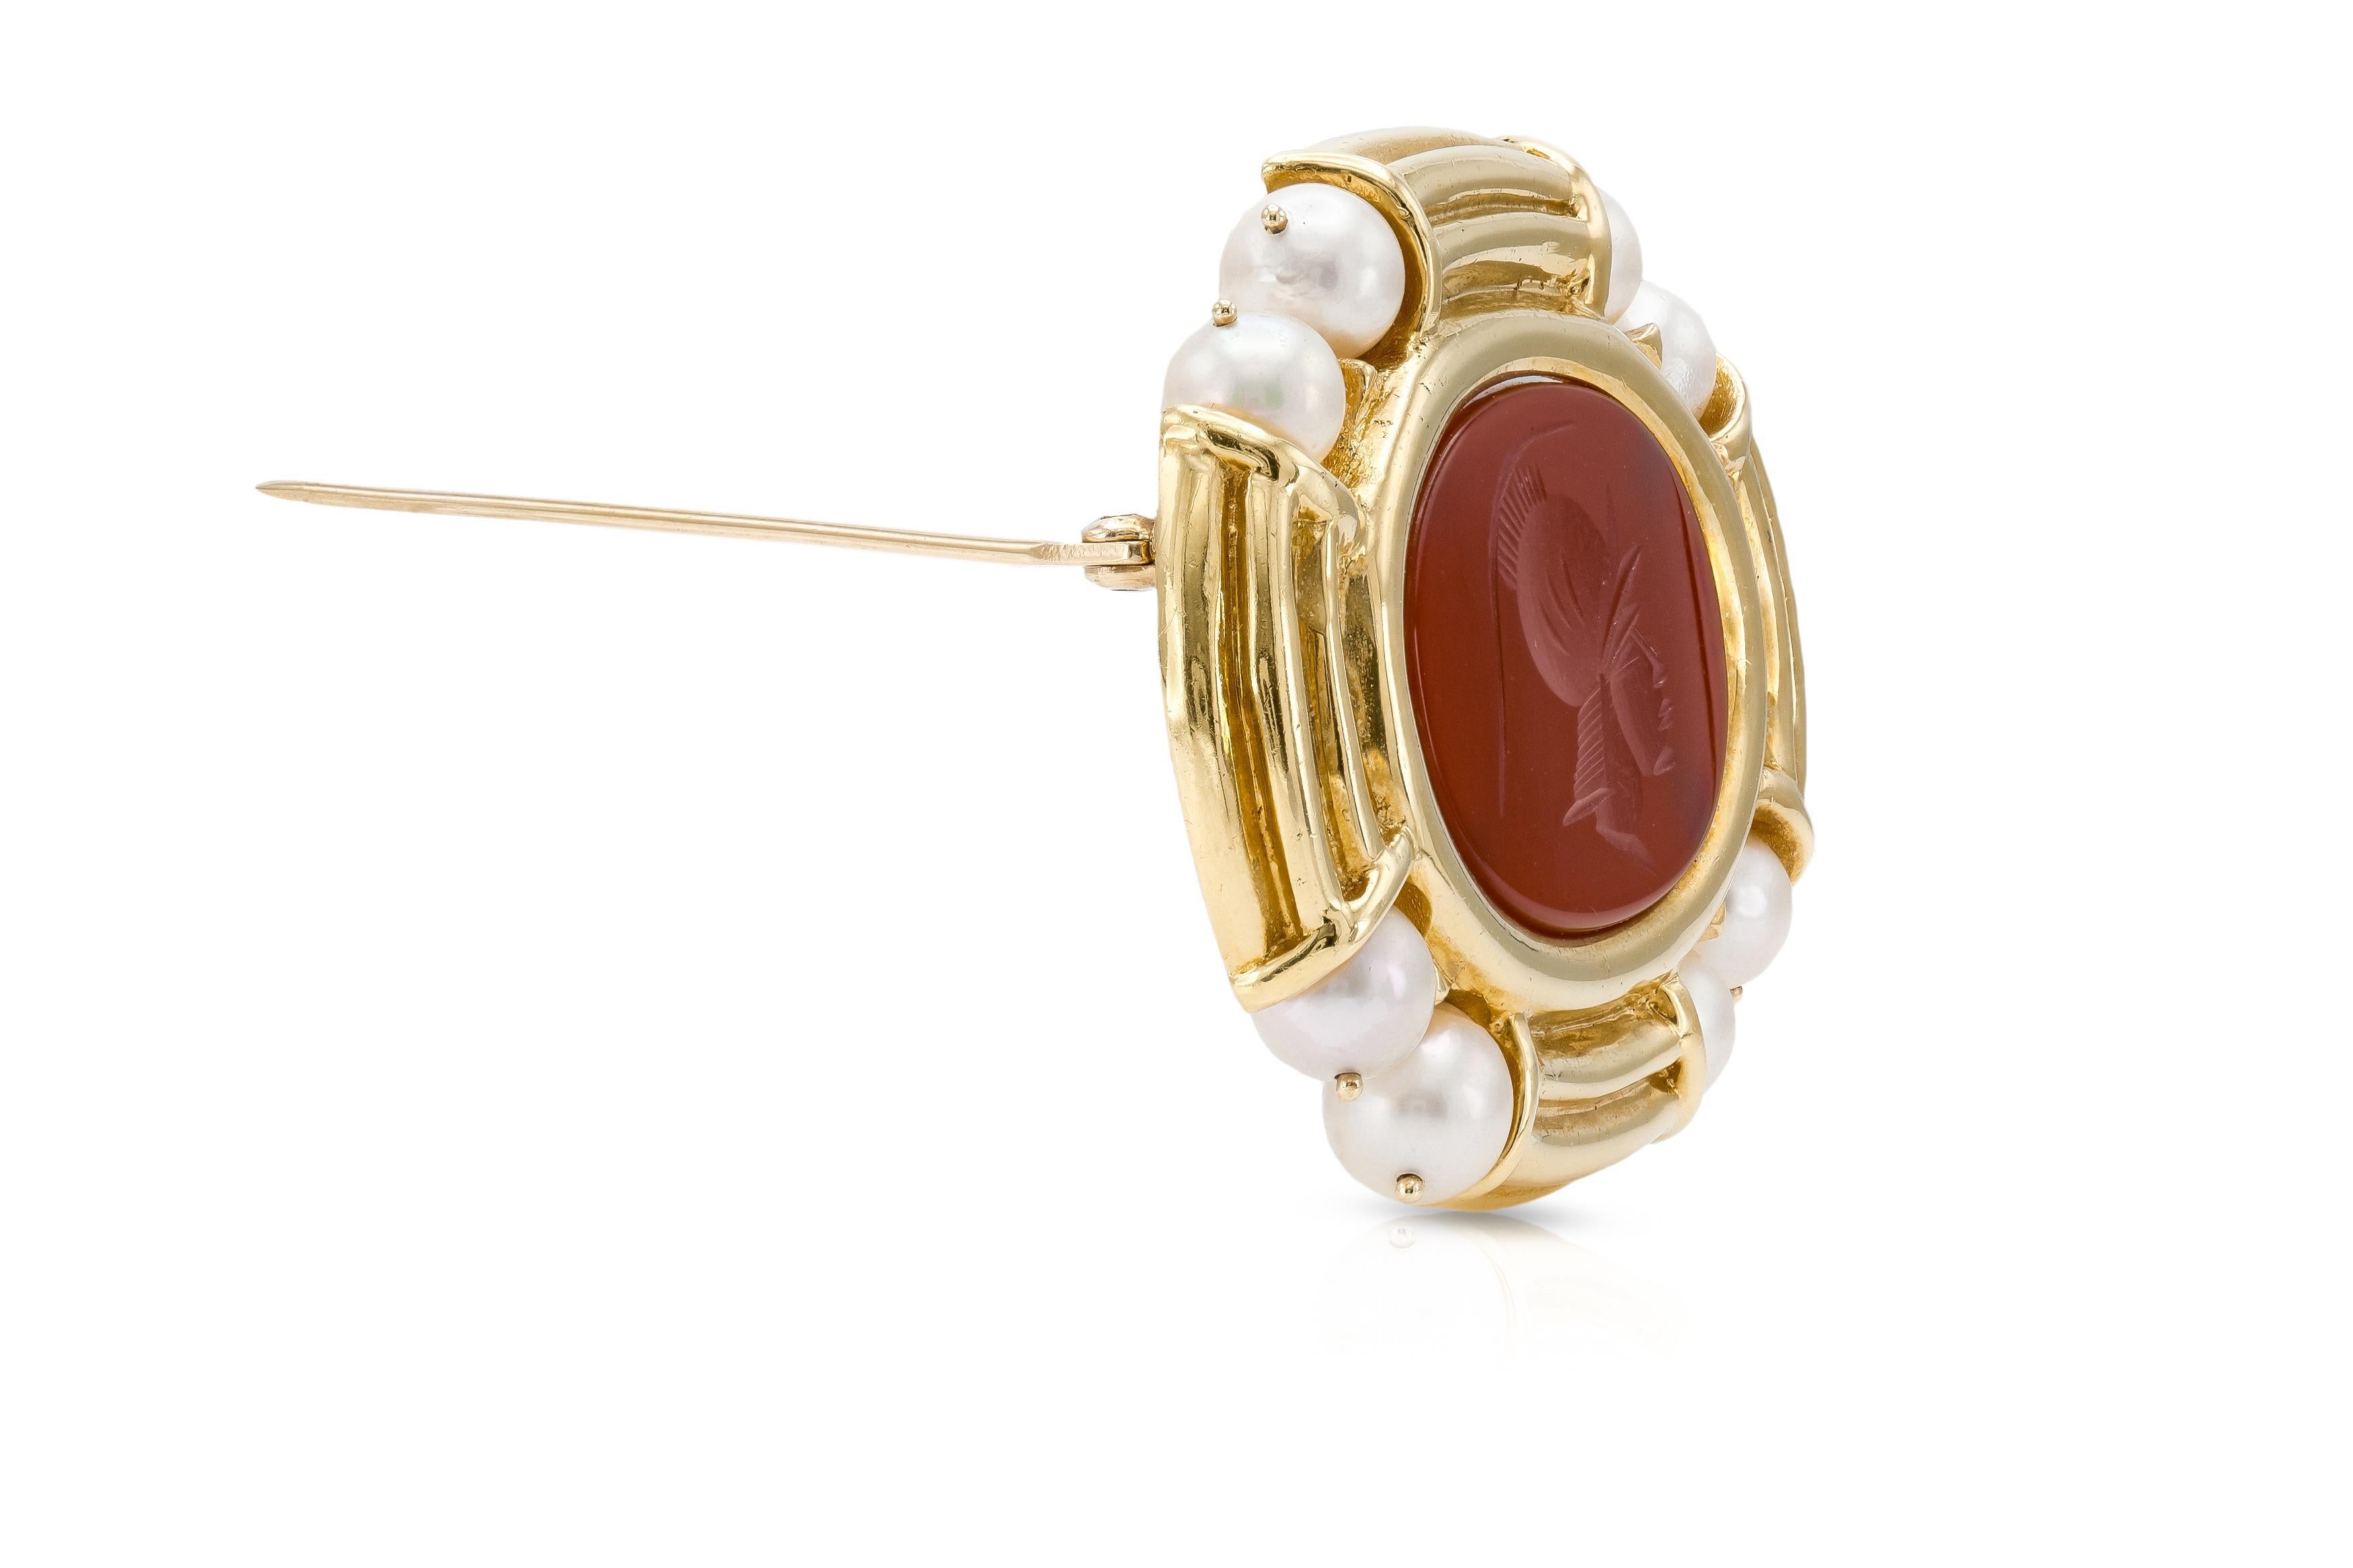 Finely crafted in 14k yellow gold with a Carnelian intaglio of a soldier.
The brooch features eight pearls.
2 x 1 1/2 inches